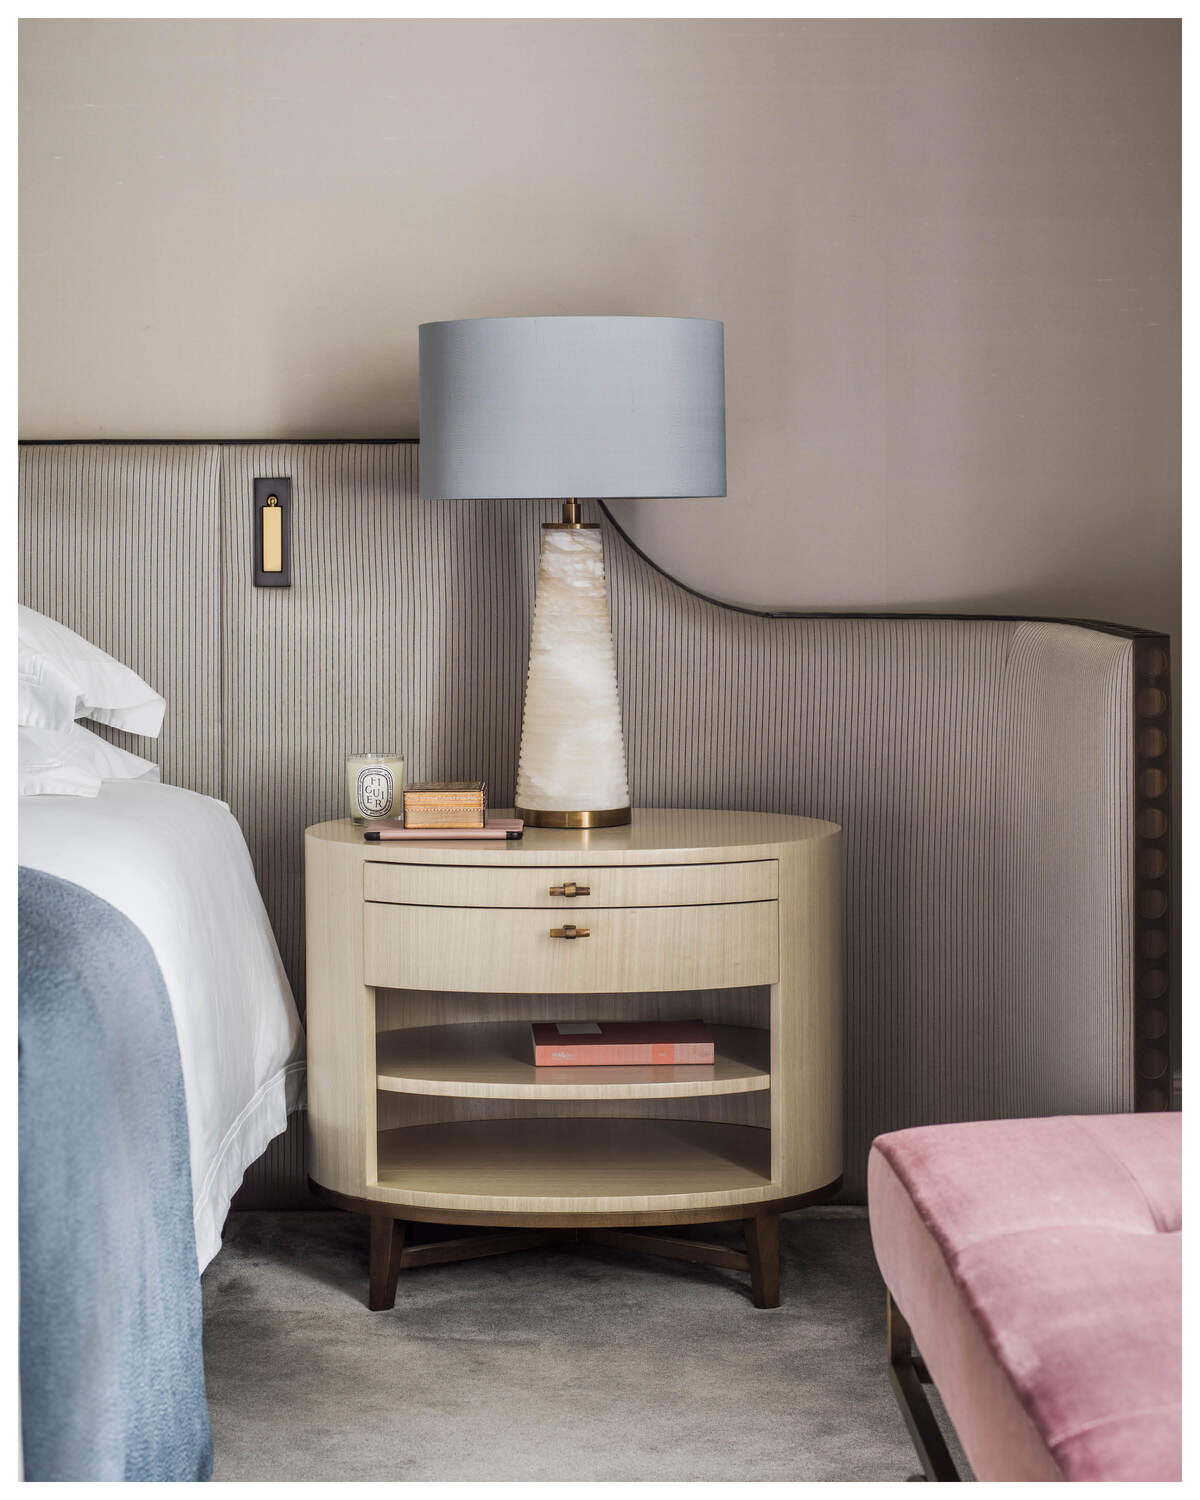 Bedside Table with a Lamp 